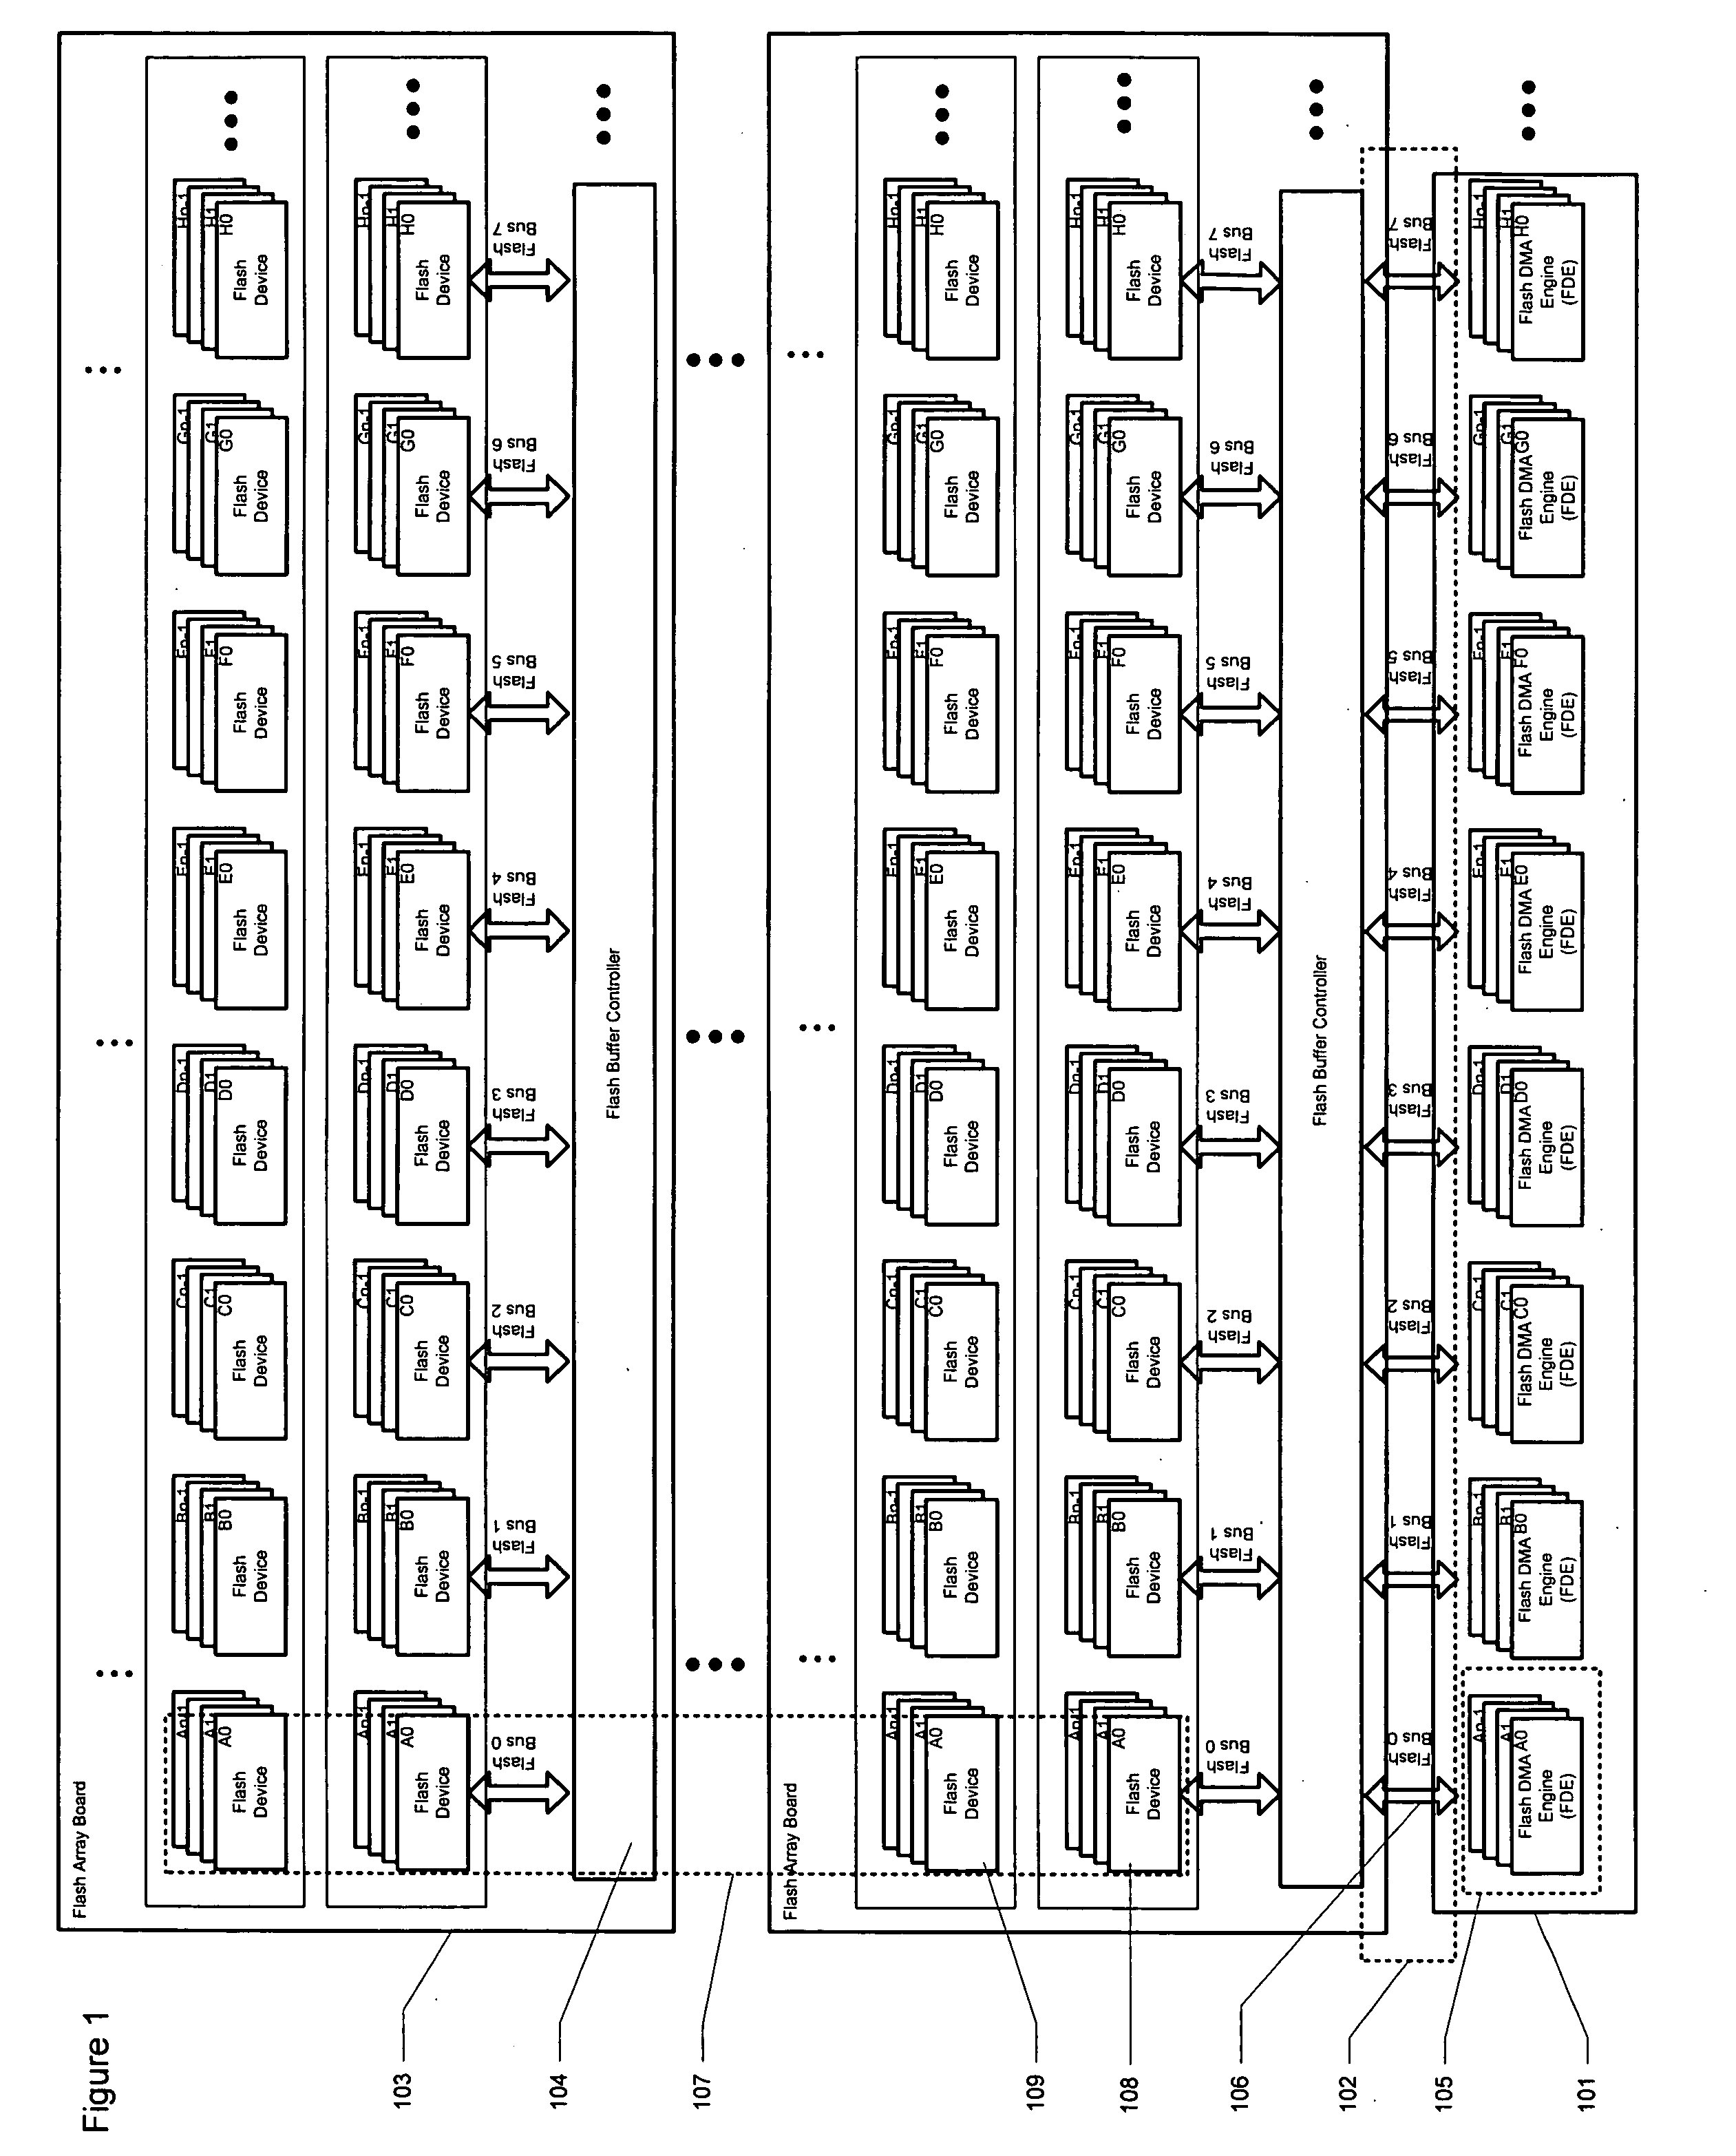 Optimized placement policy for solid state storage devices